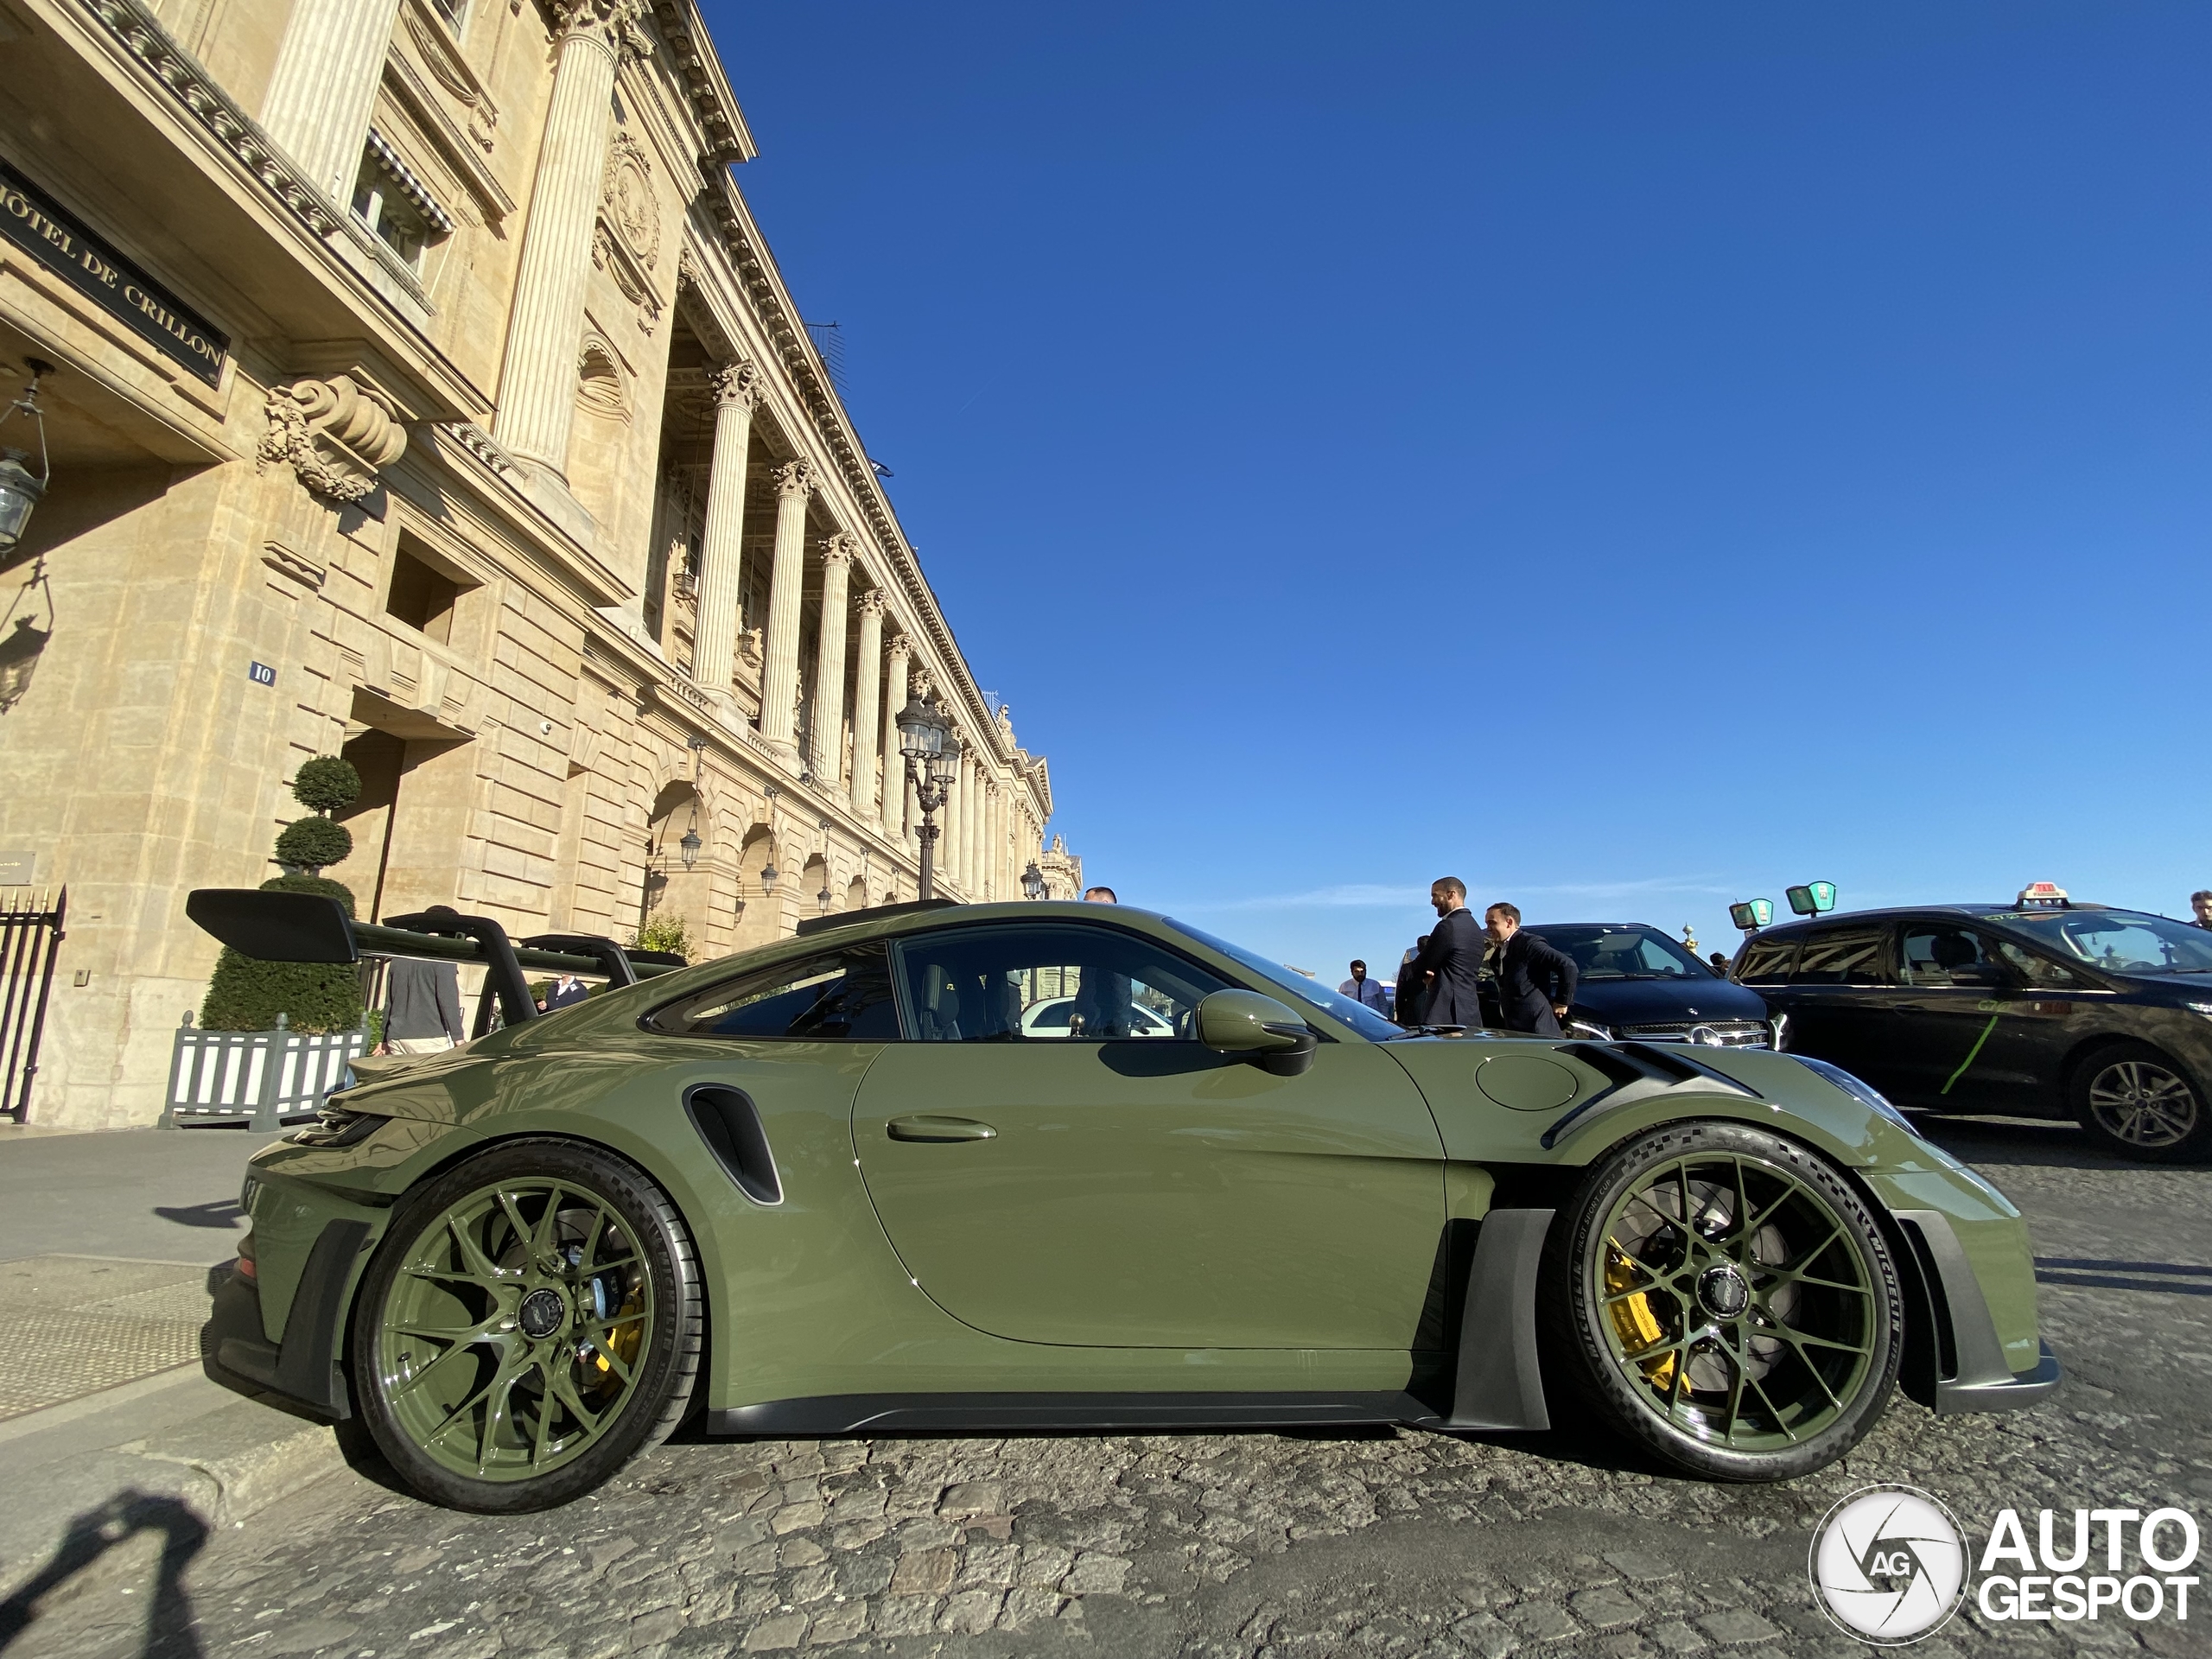 A rather extraordinary GT3 RS shows up in Paris.